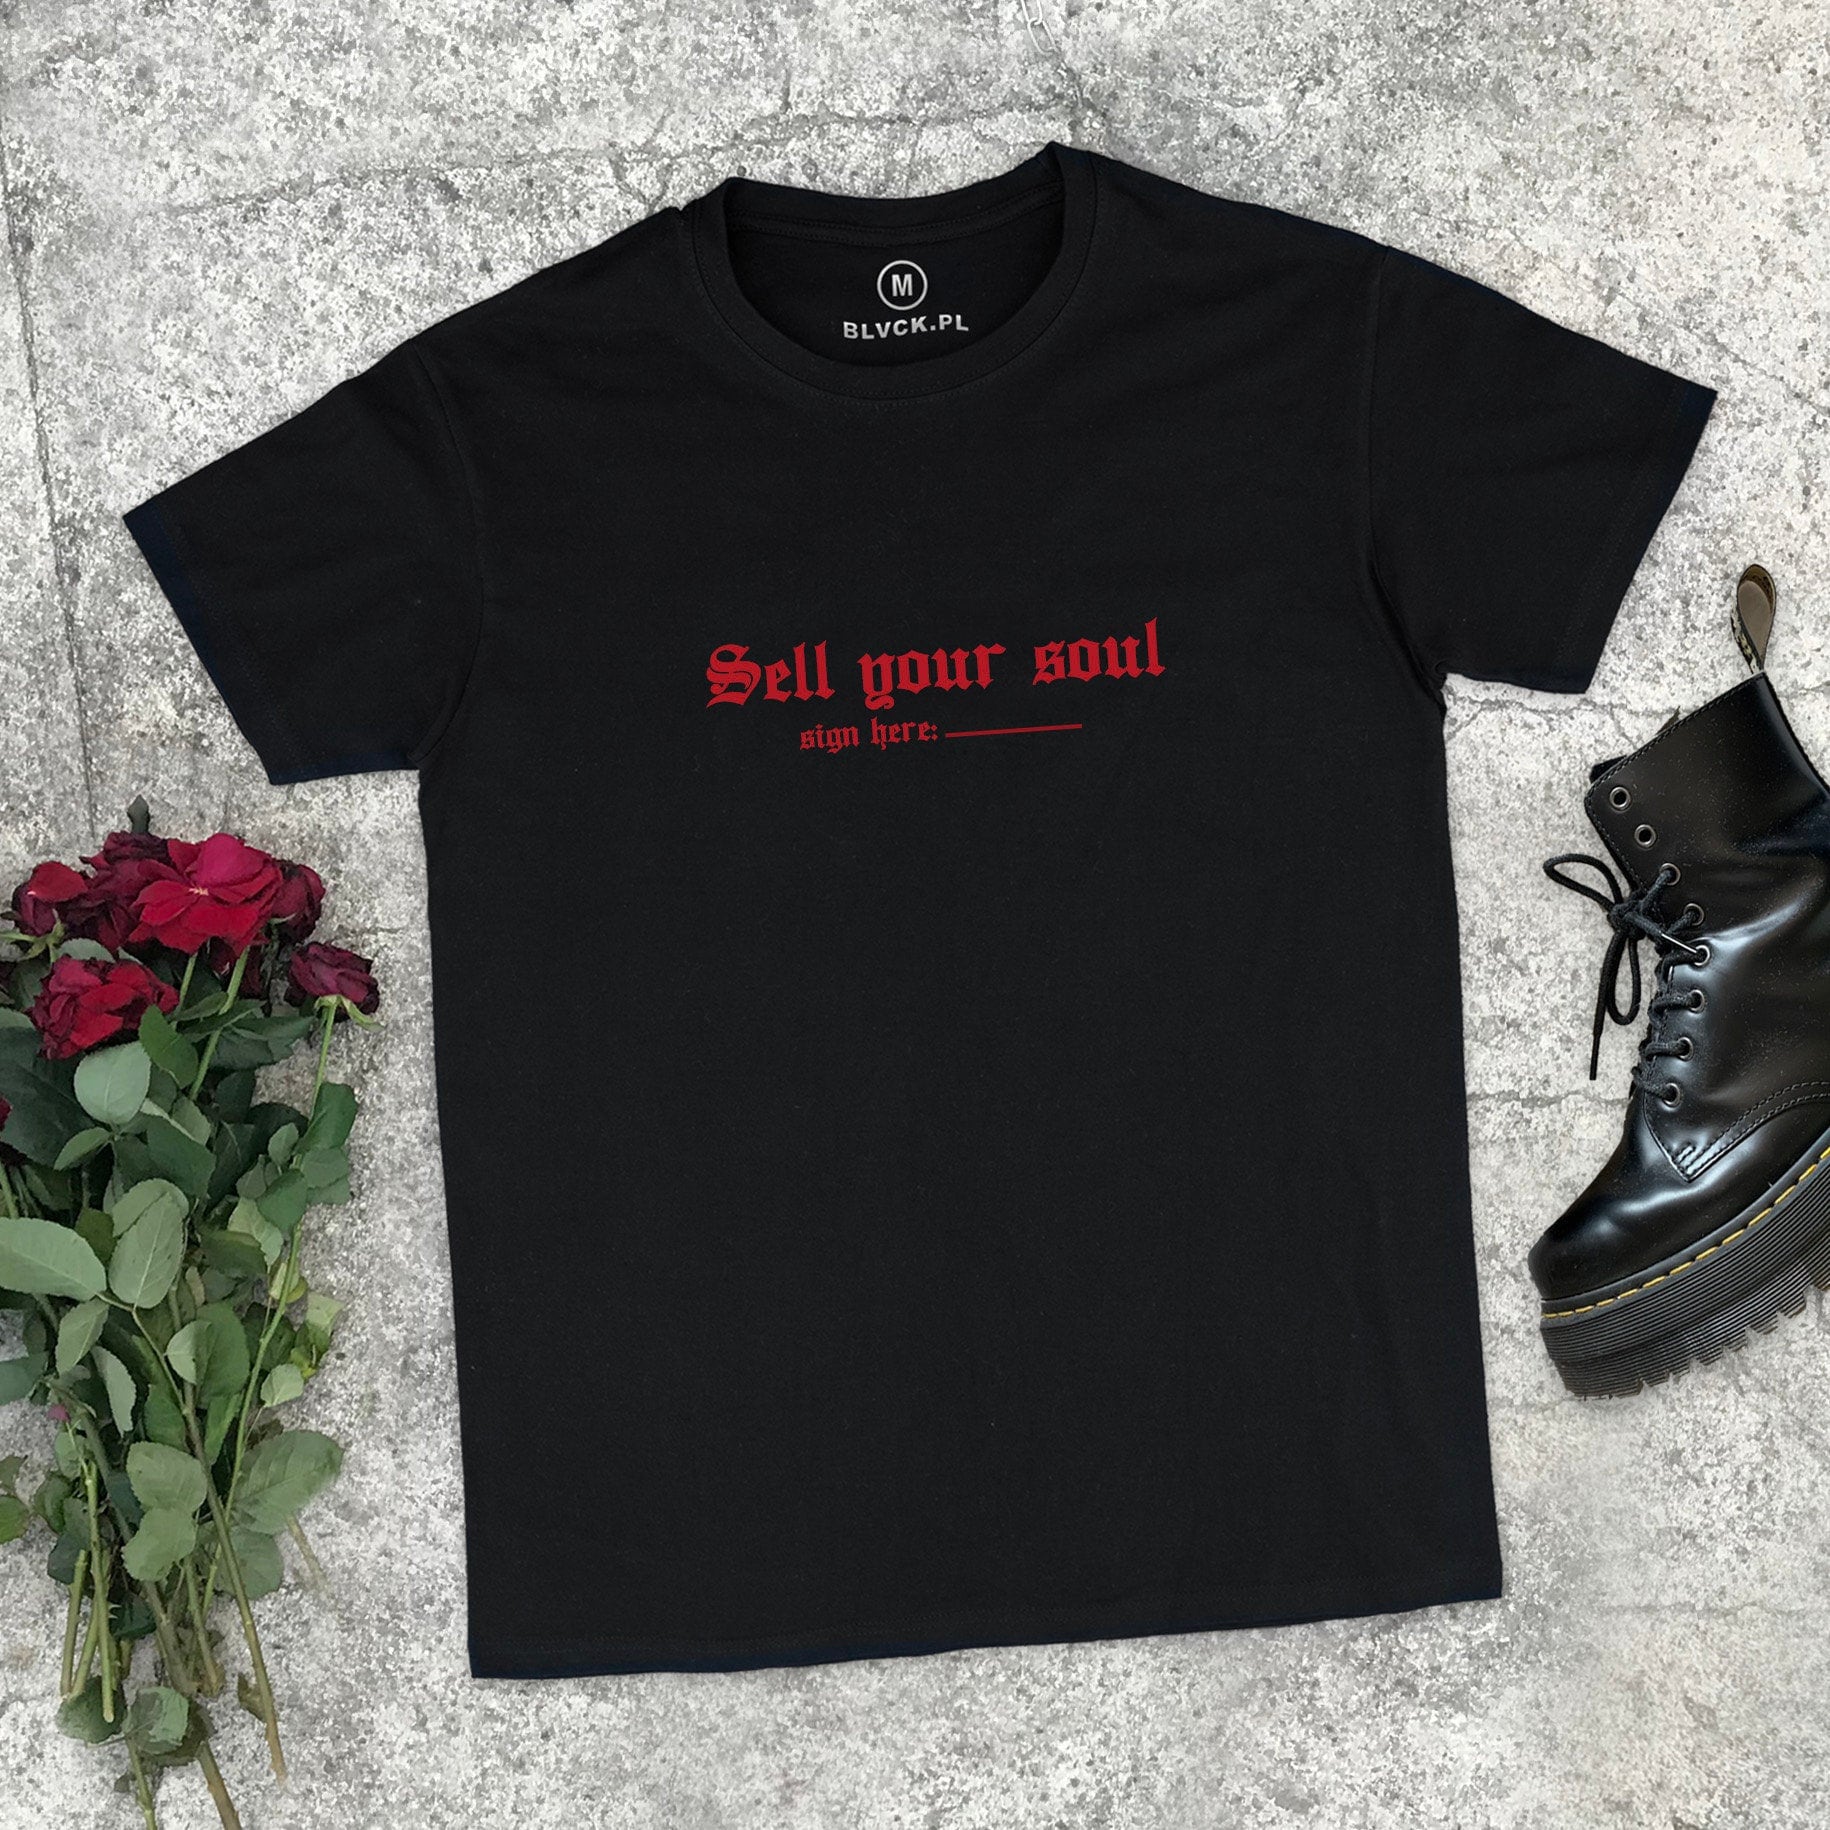 Sell Your Soul Shirt Aesthetic Clothing Tumblr Shirt Goth Gothic Witch Aesthetic Shirt Grunge Shirt Grunge Clothing Goth Tumblr